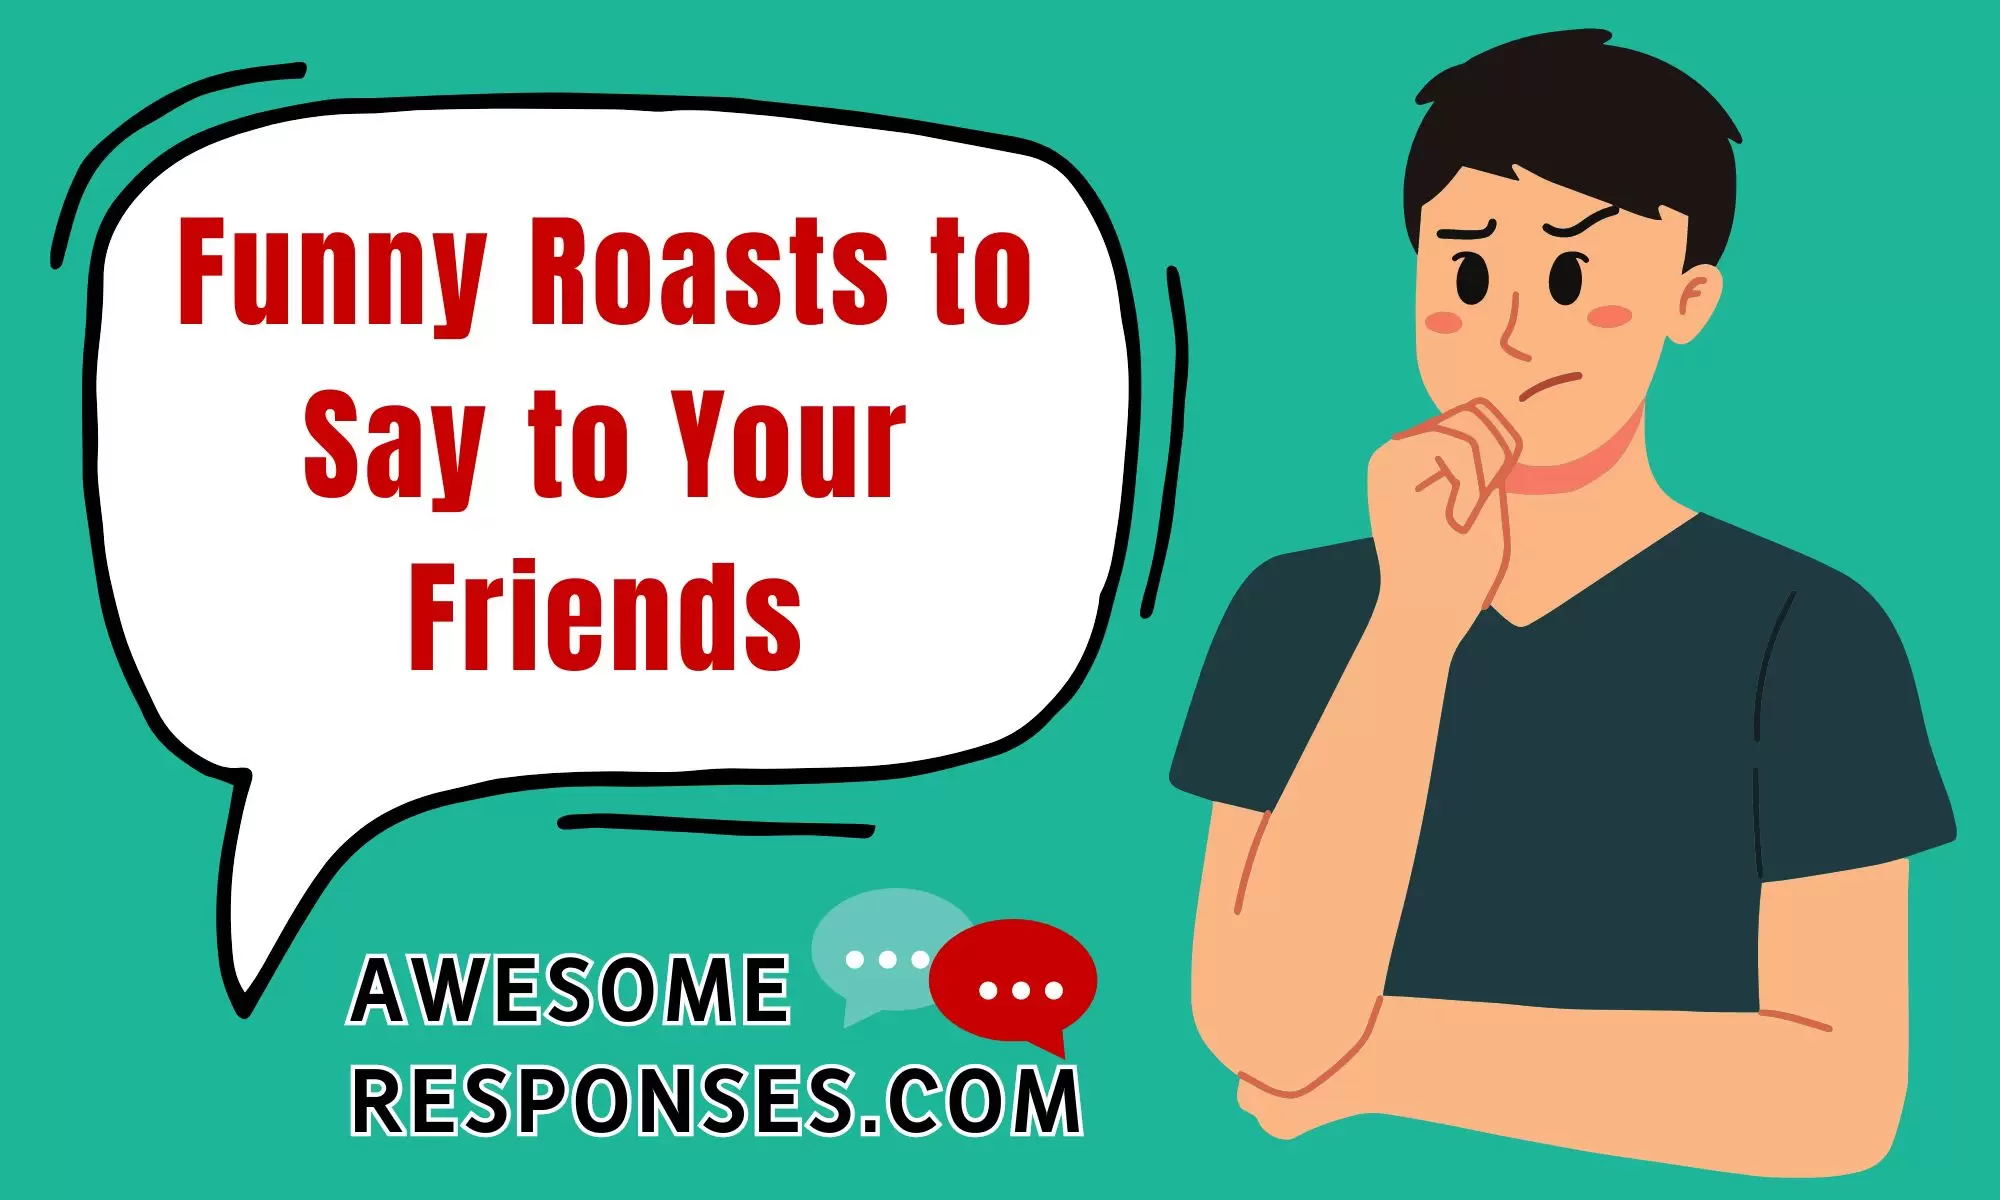 Funny Roasts to Say to Your Friends